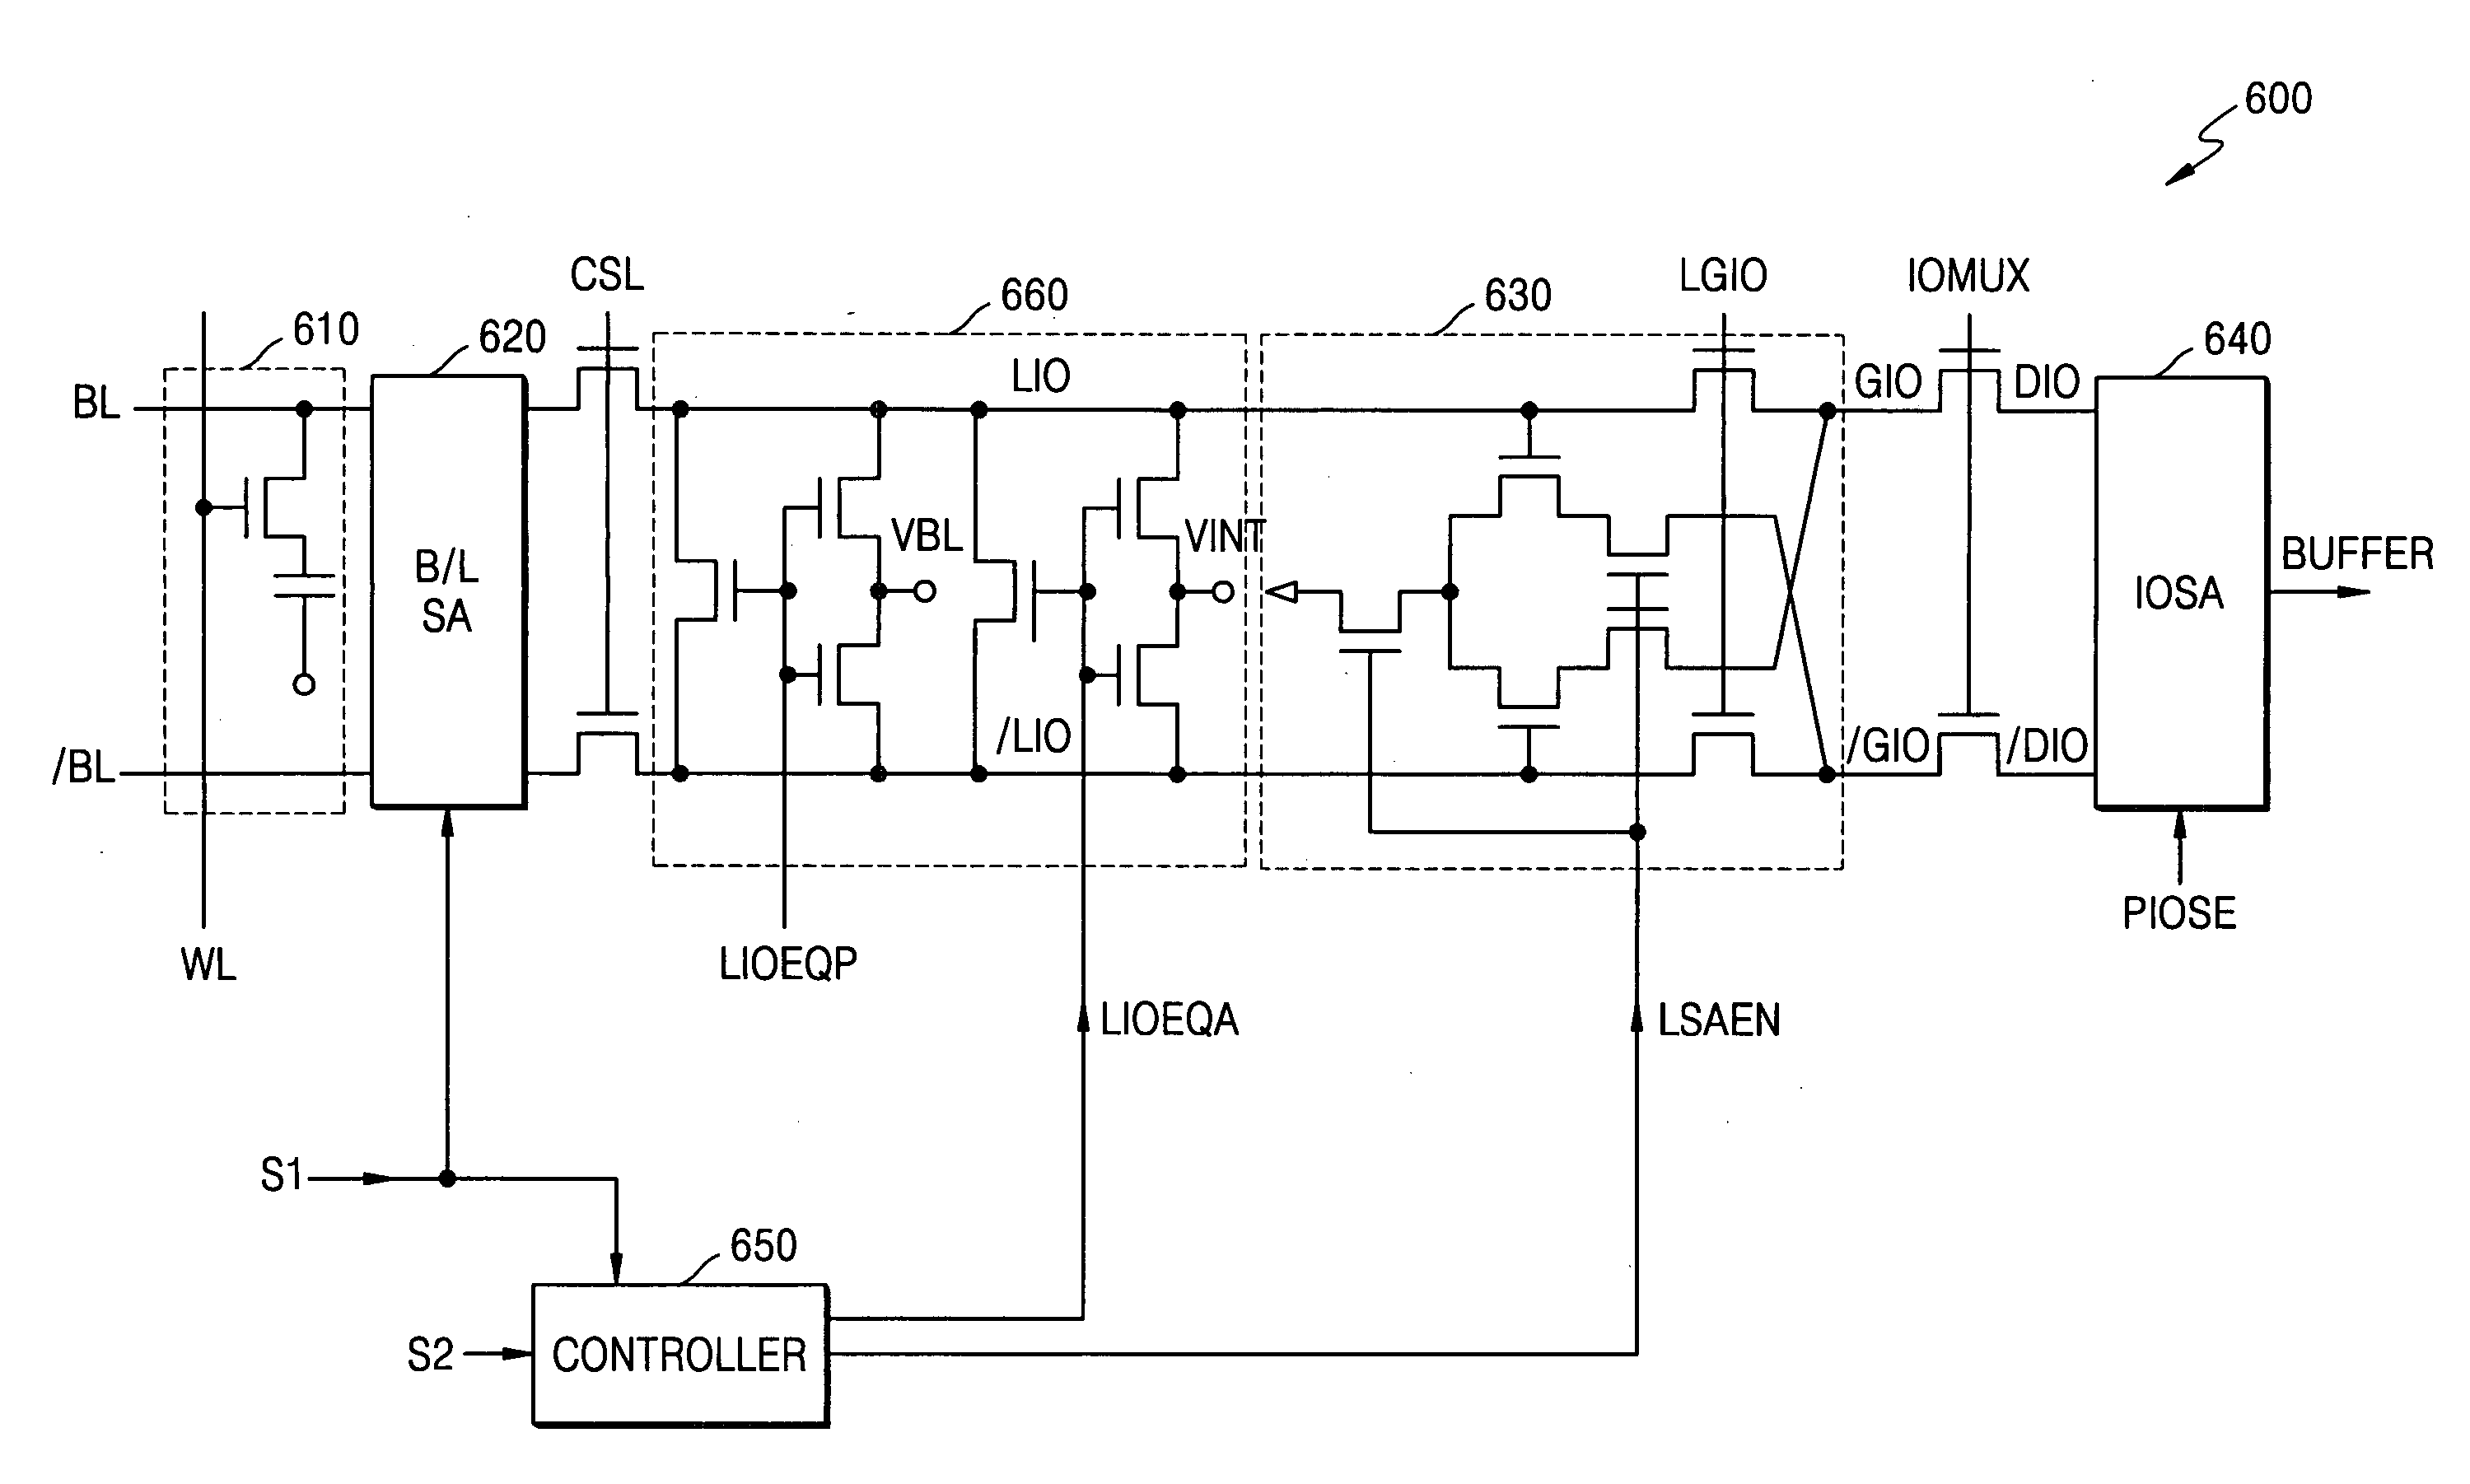 Semiconductor memory device having local sense amplifier with on/off control